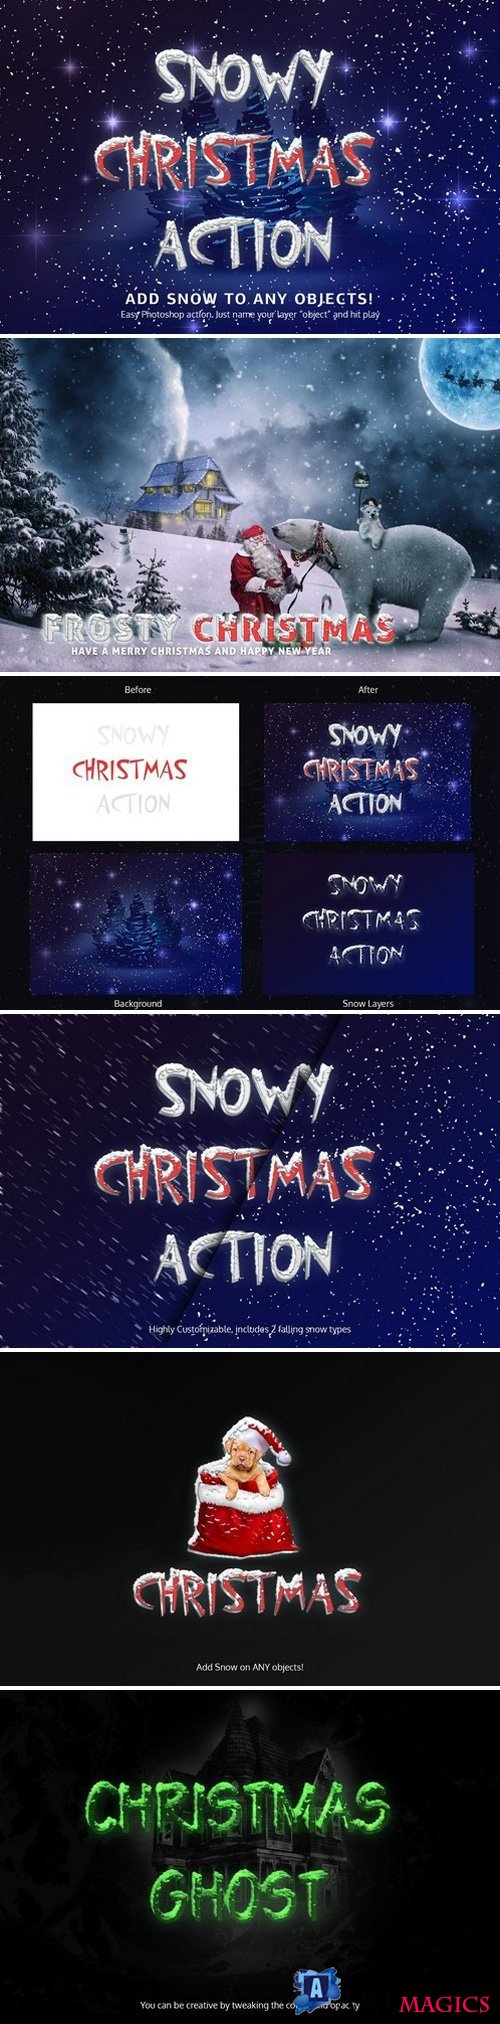 Snowy Christmas Action 2153889